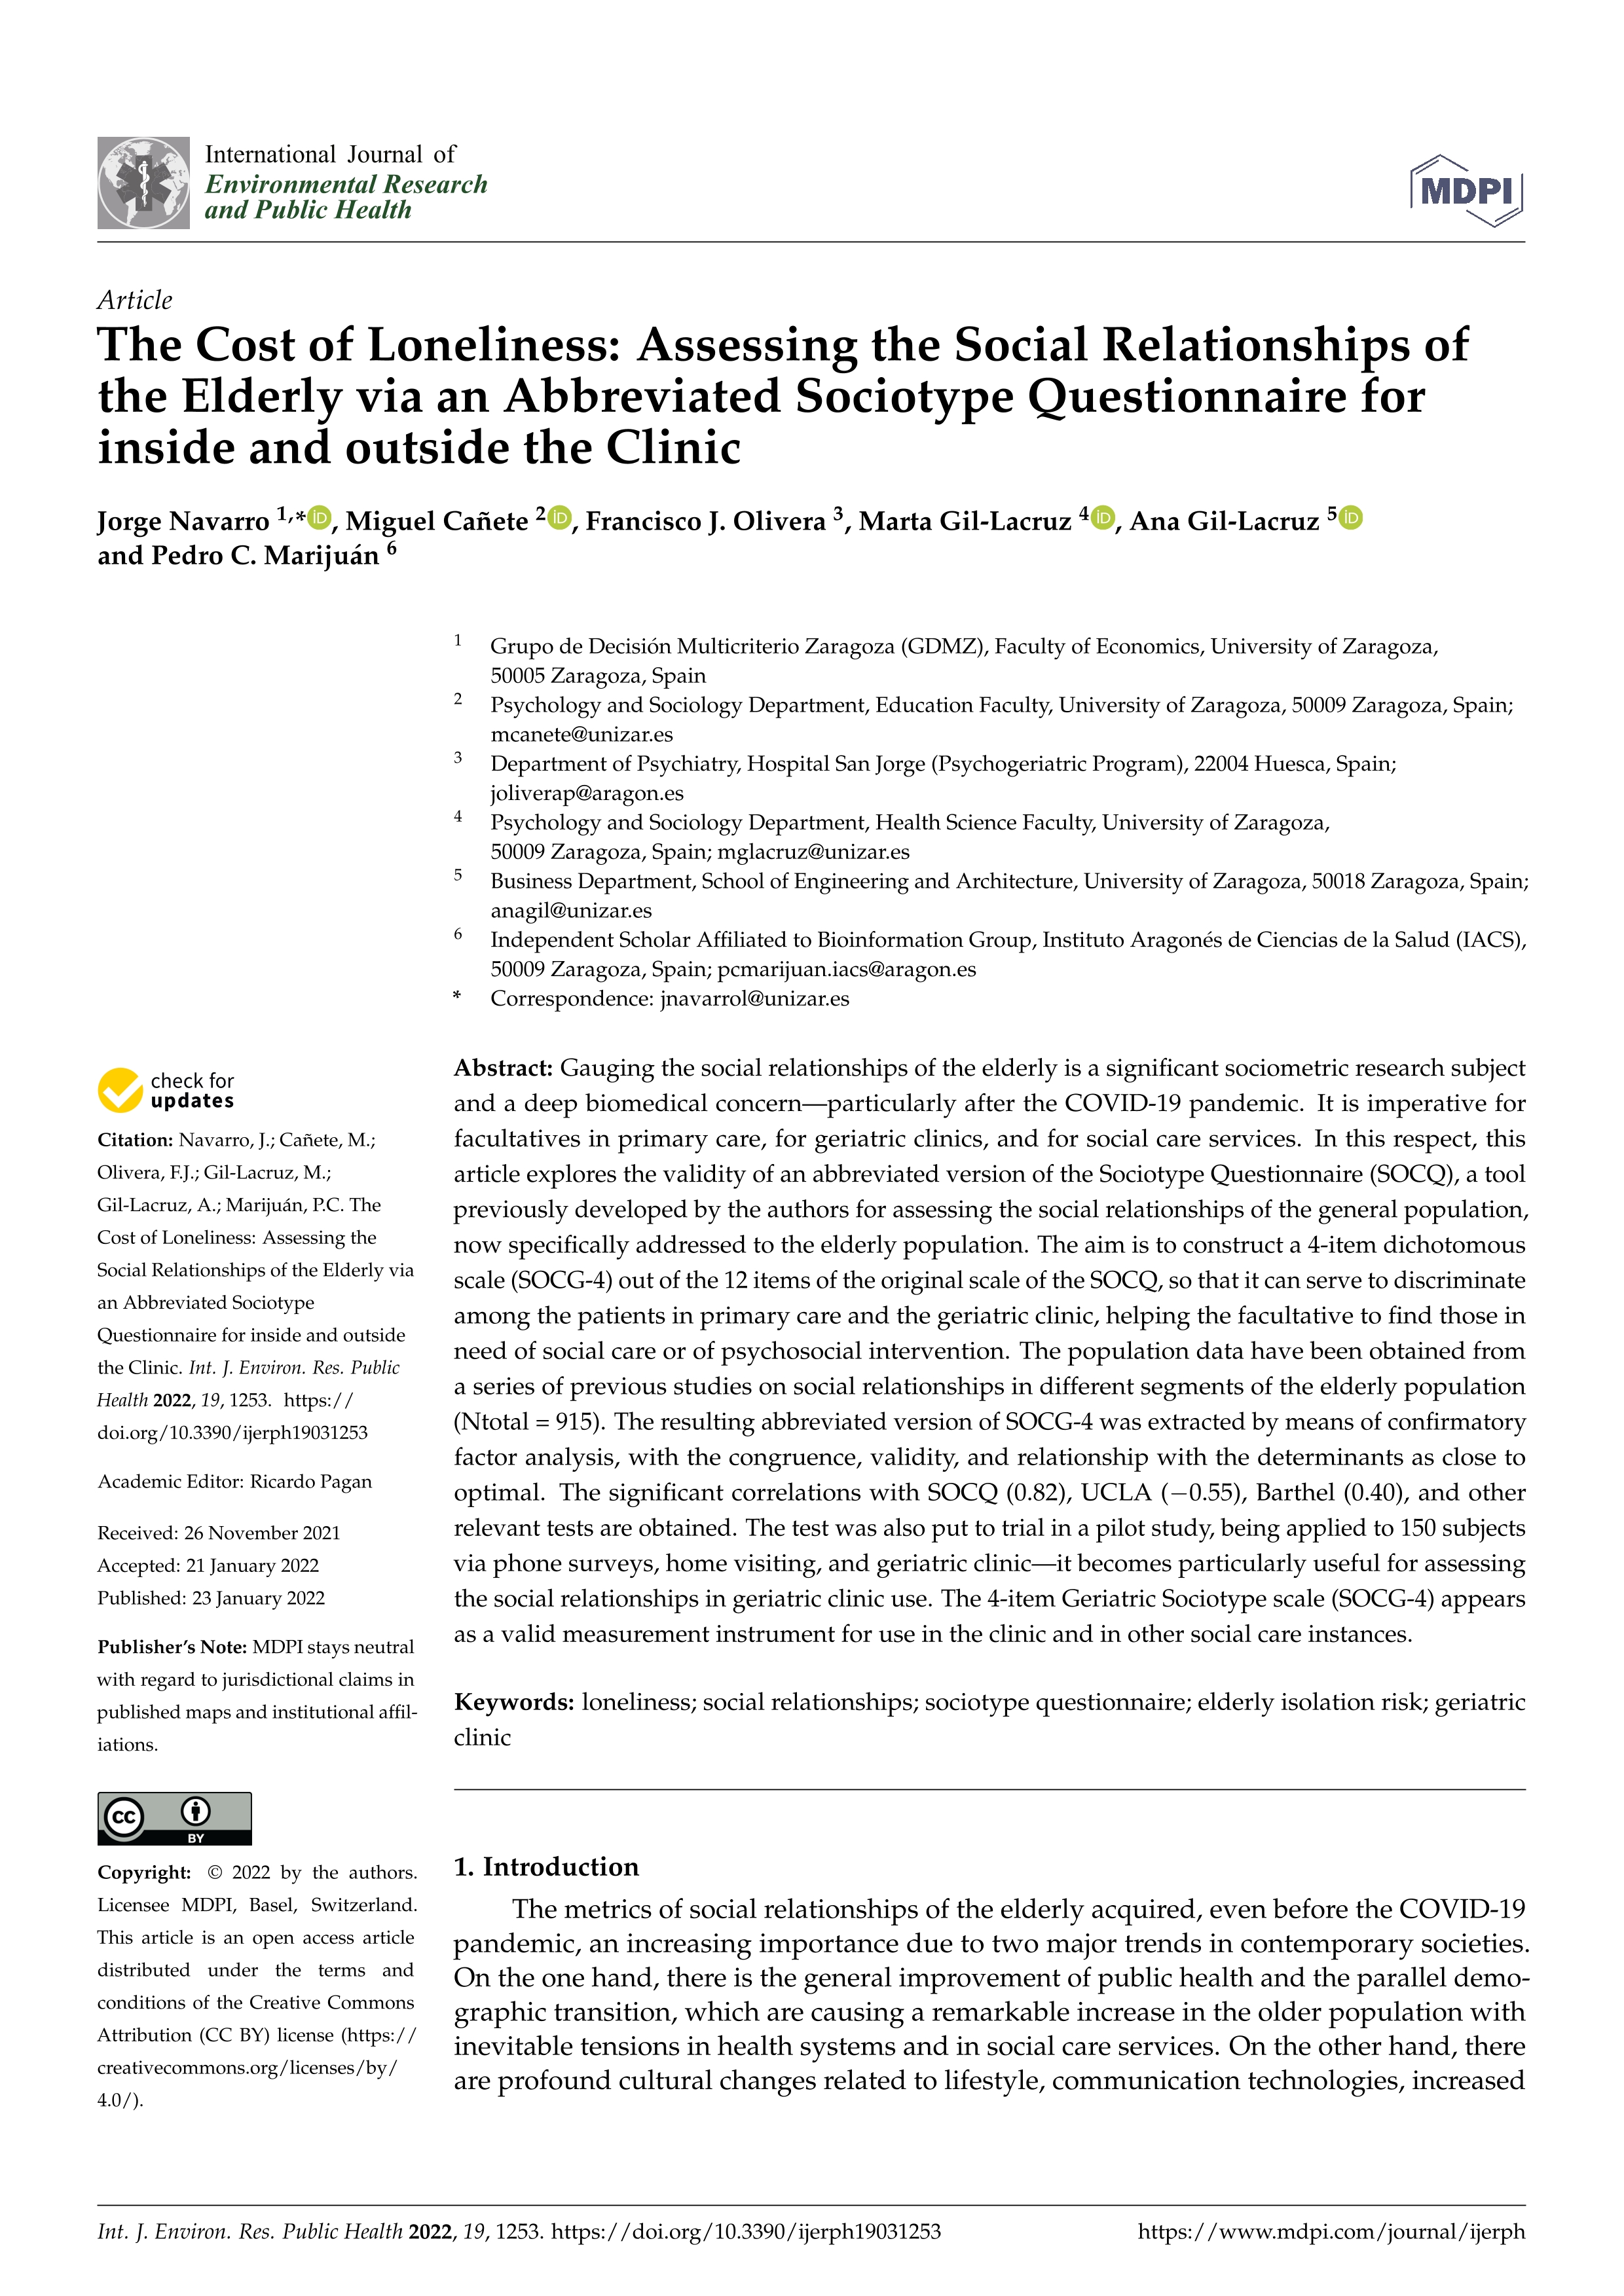 The Cost of Loneliness: Assessing the Social Relationships of the Elderly via an Abbreviated Sociotype Questionnaire for inside and outside the Clinic